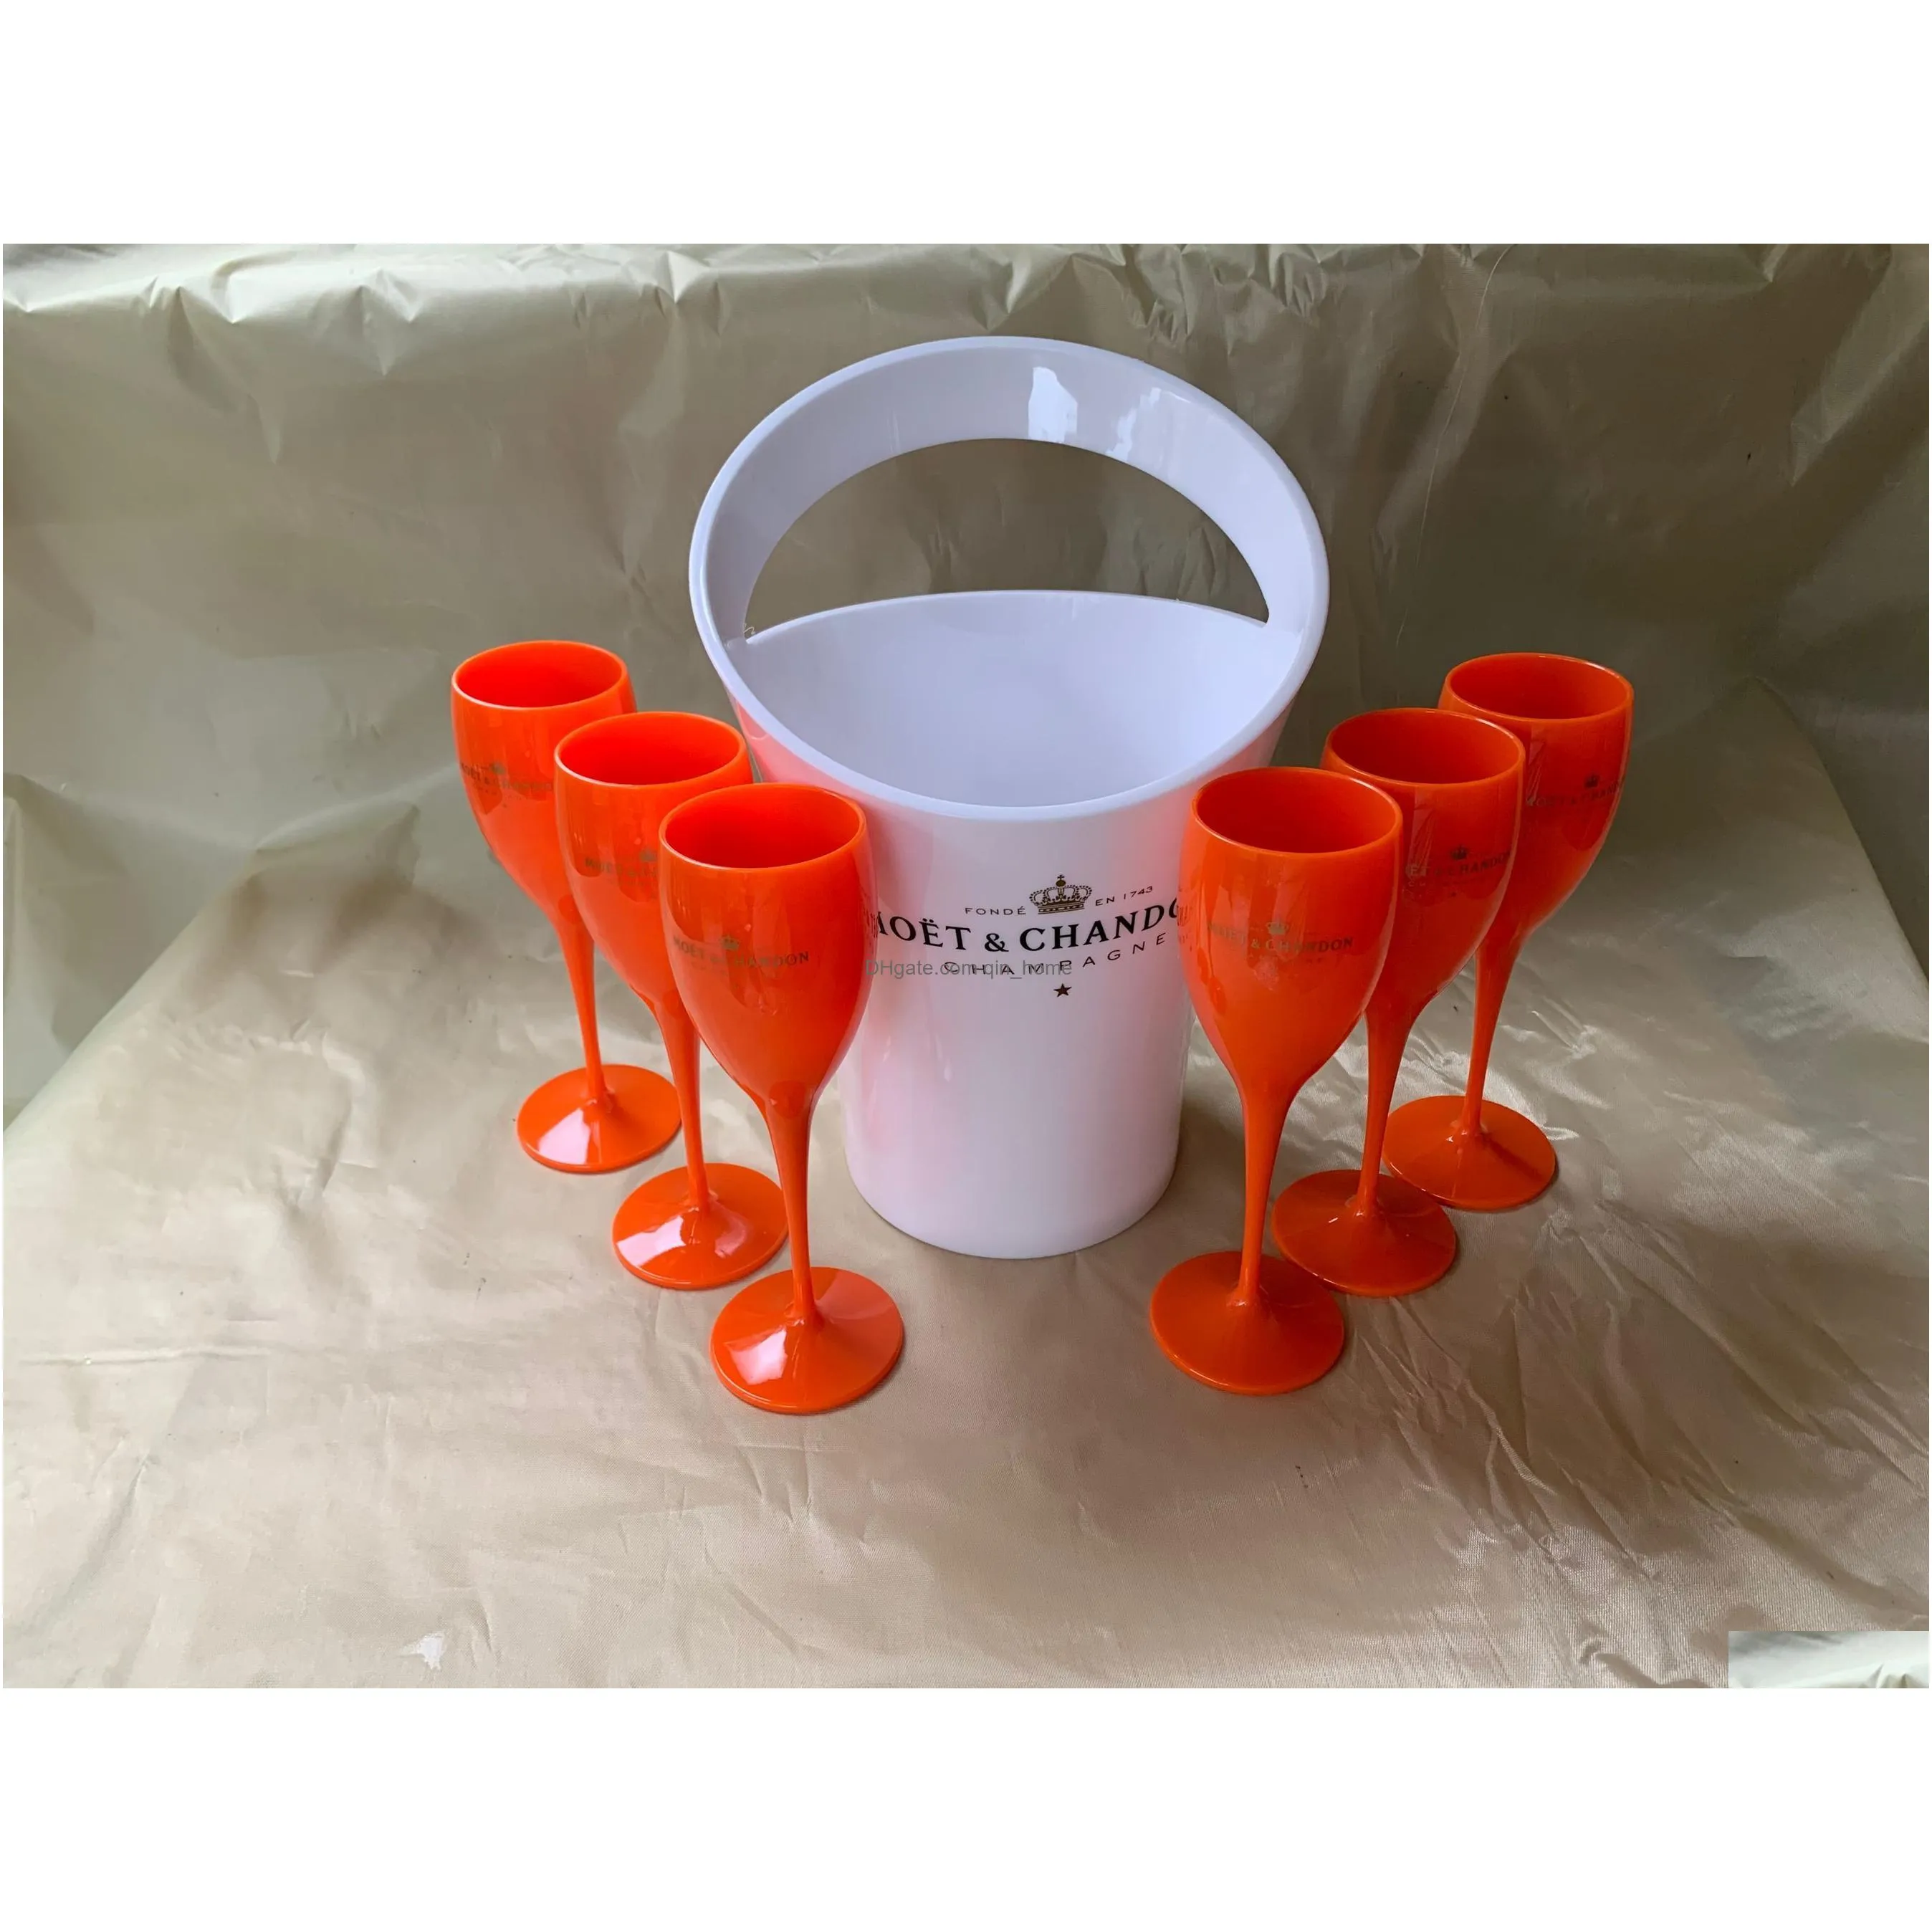 6 cups 1 bucket ice bucket and wine glass 3000ml acrylic goblets champagne glasses wedding wine bar party wine bottle cooler